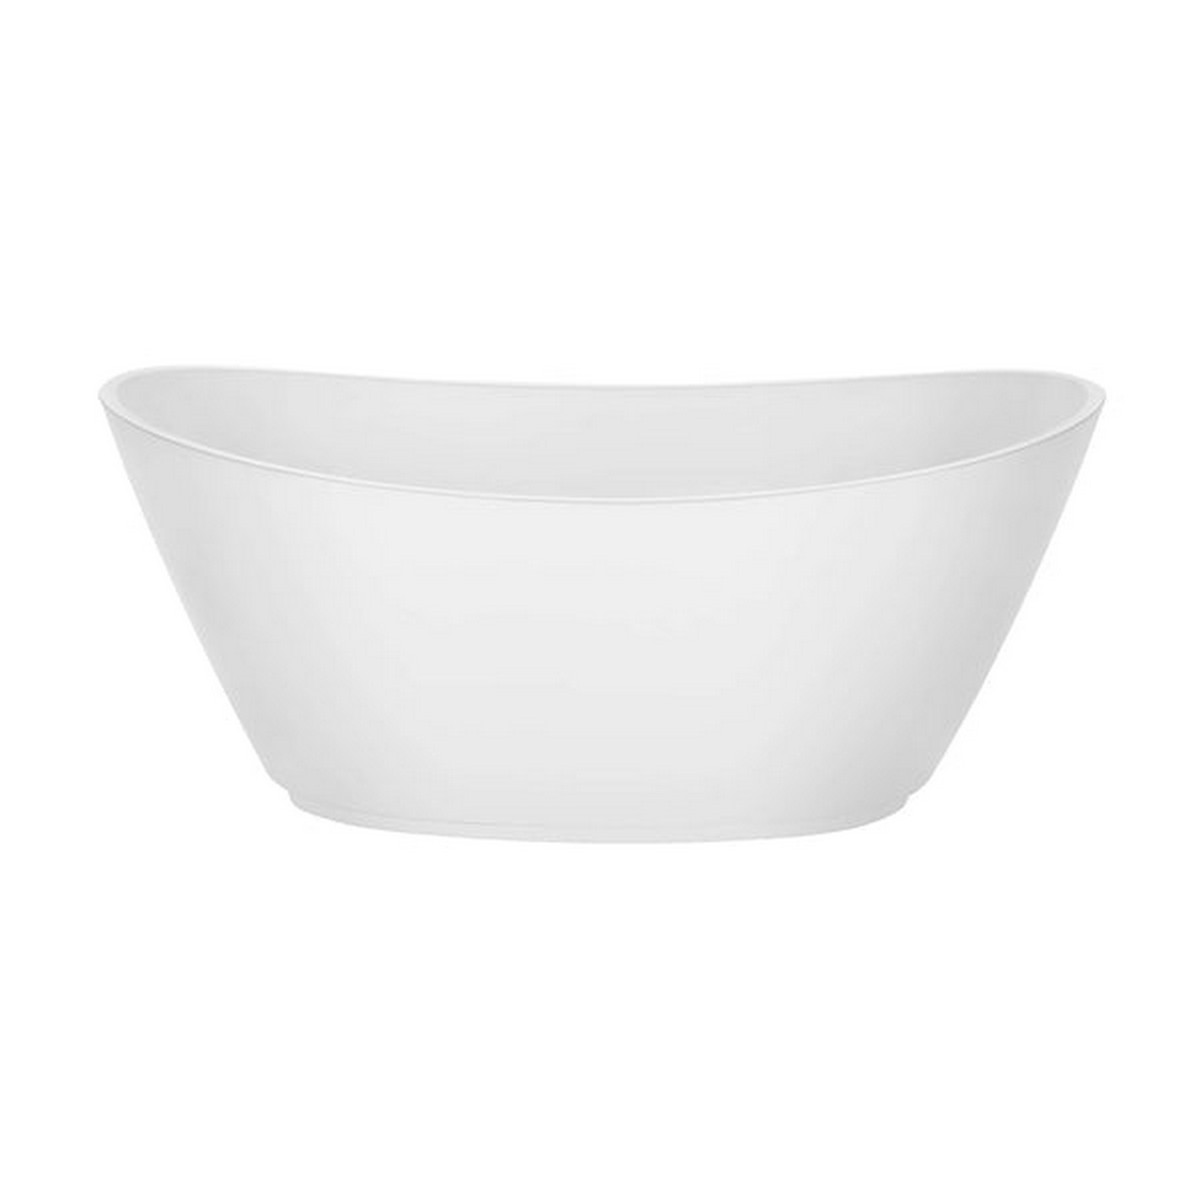 EMPAVA EMPV-69FT1603 68 7/8 X 28 3/4 INCH FREESTANDING OVAL SOAKING BATHTUB WITH CENTER DRAIN IN WHITE